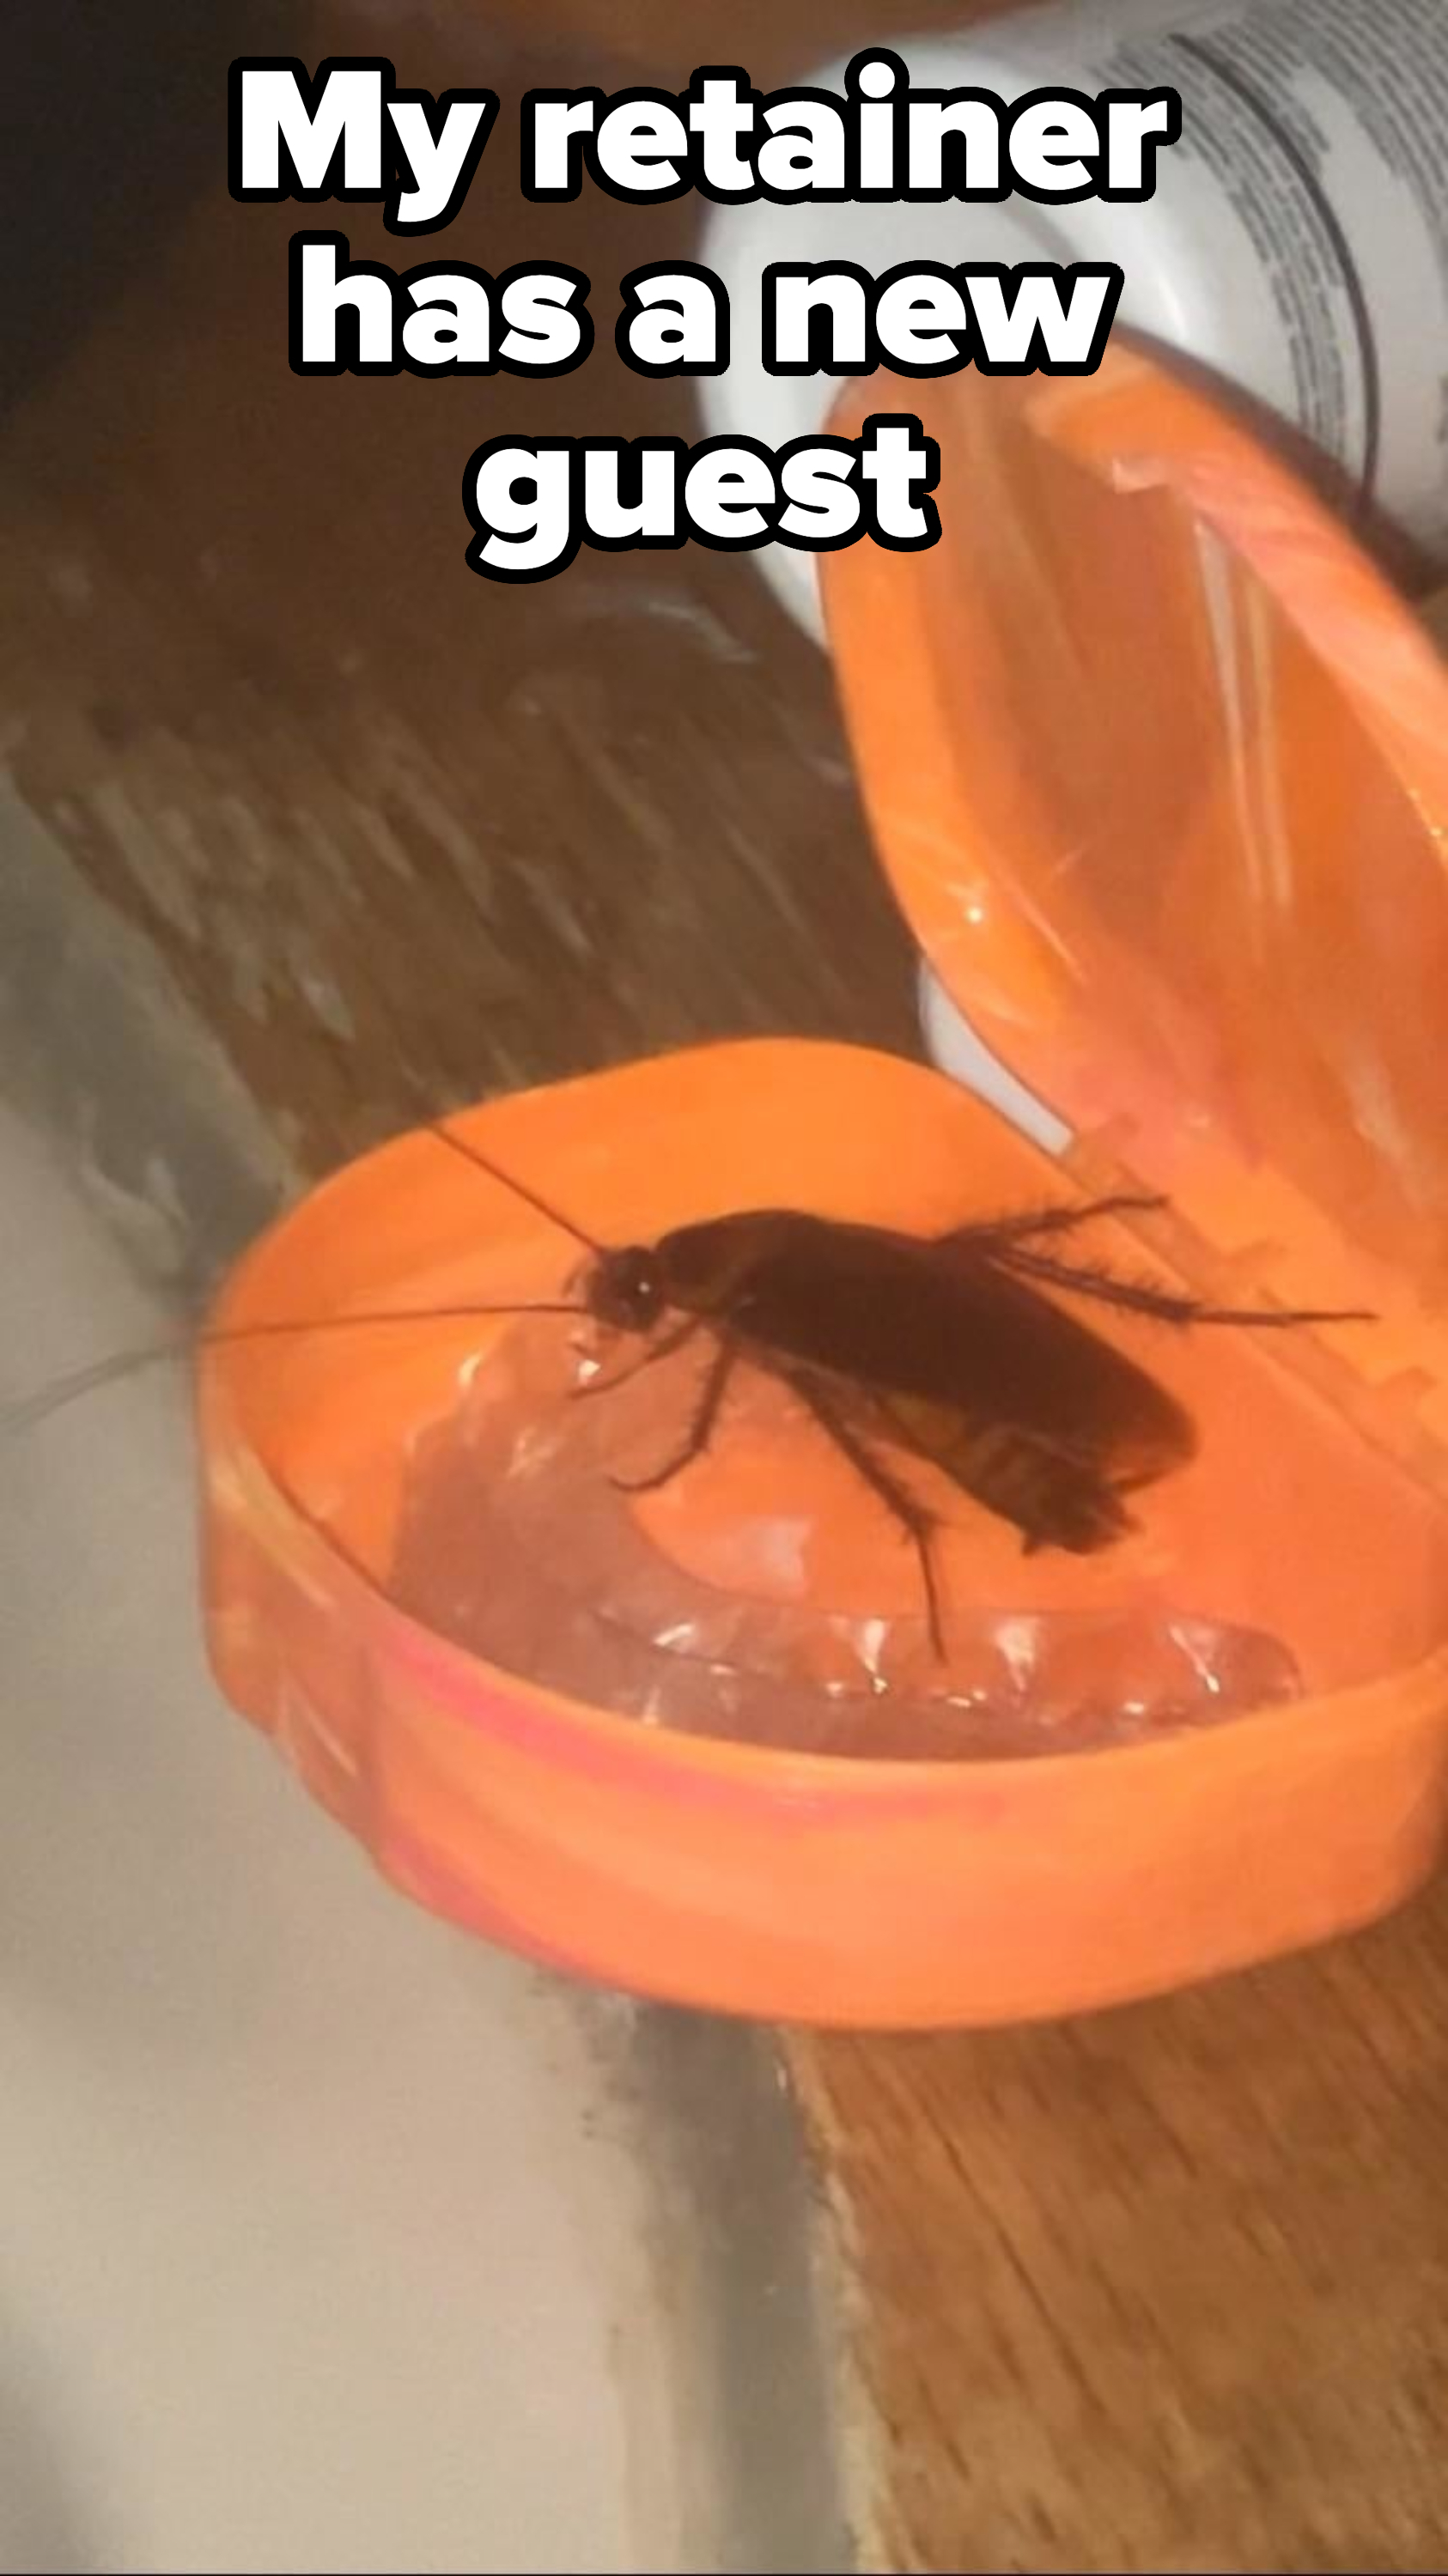 A large cockroach inside an open, heart-shaped plastic container on top of a retainer